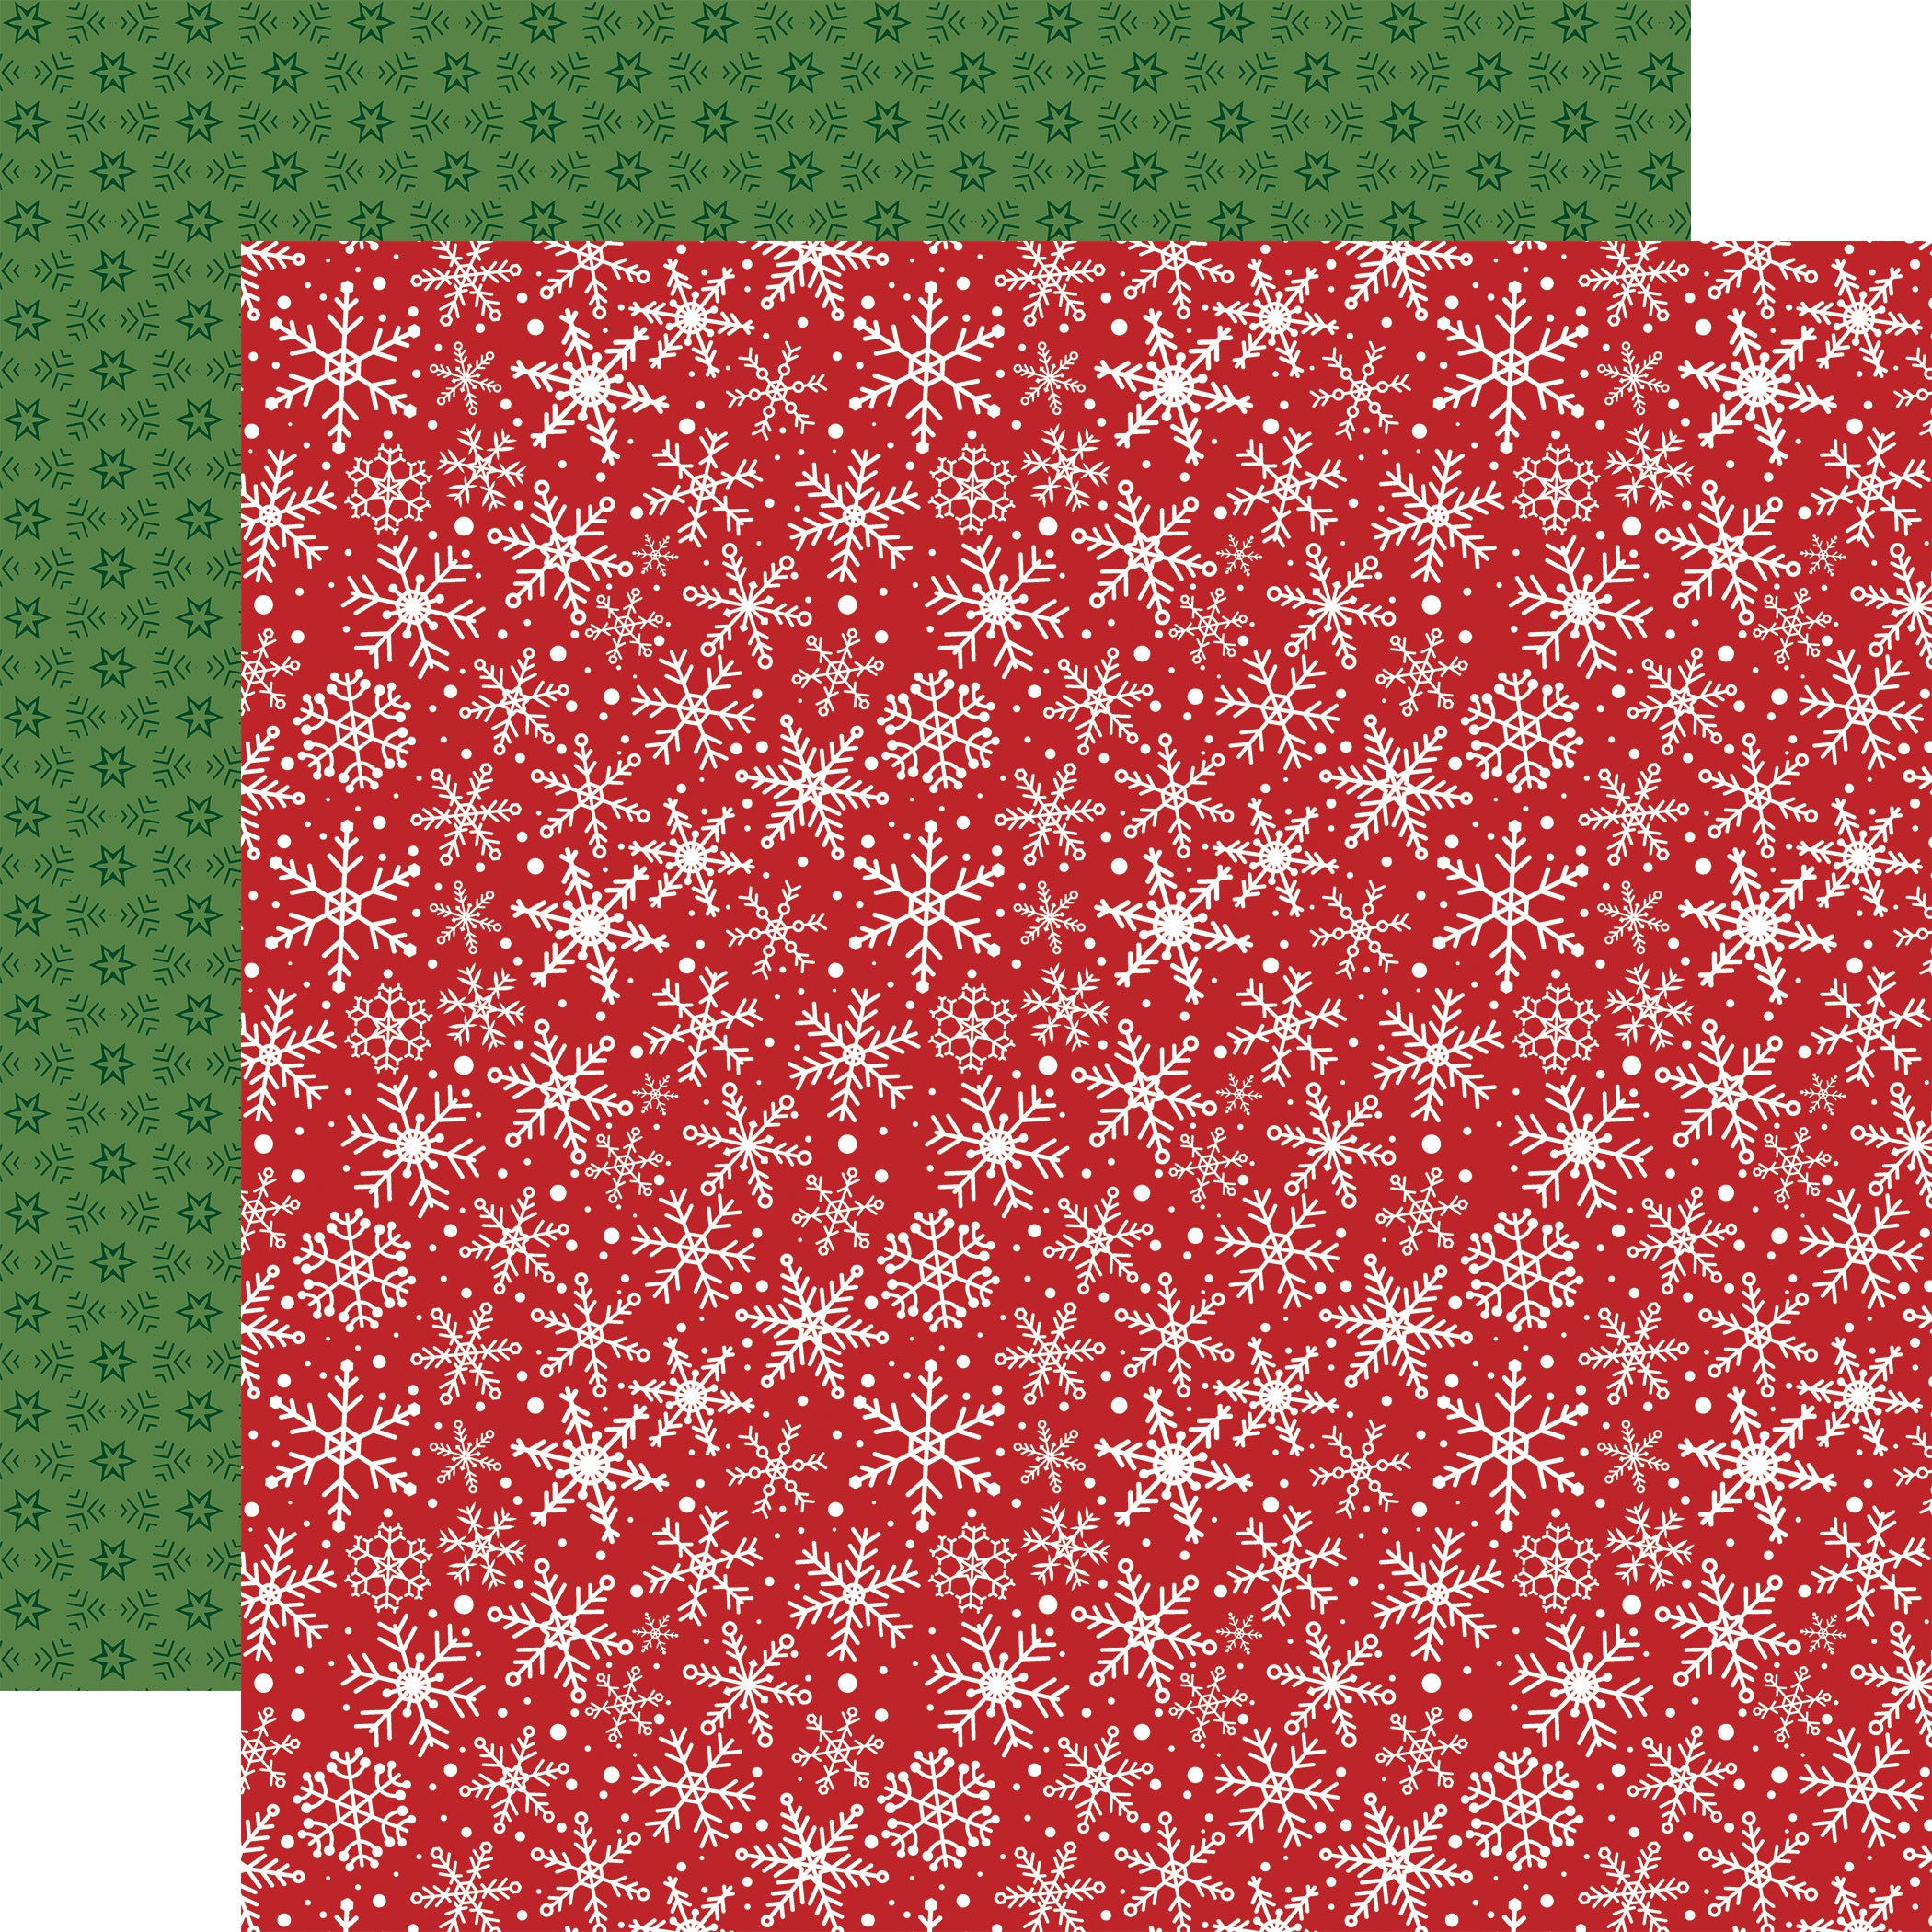 Have A Holly Jolly Christmas Collection Jolly Snowflakes 12 x 12 Double-Sided Scrapbook Paper by Echo Park Paper